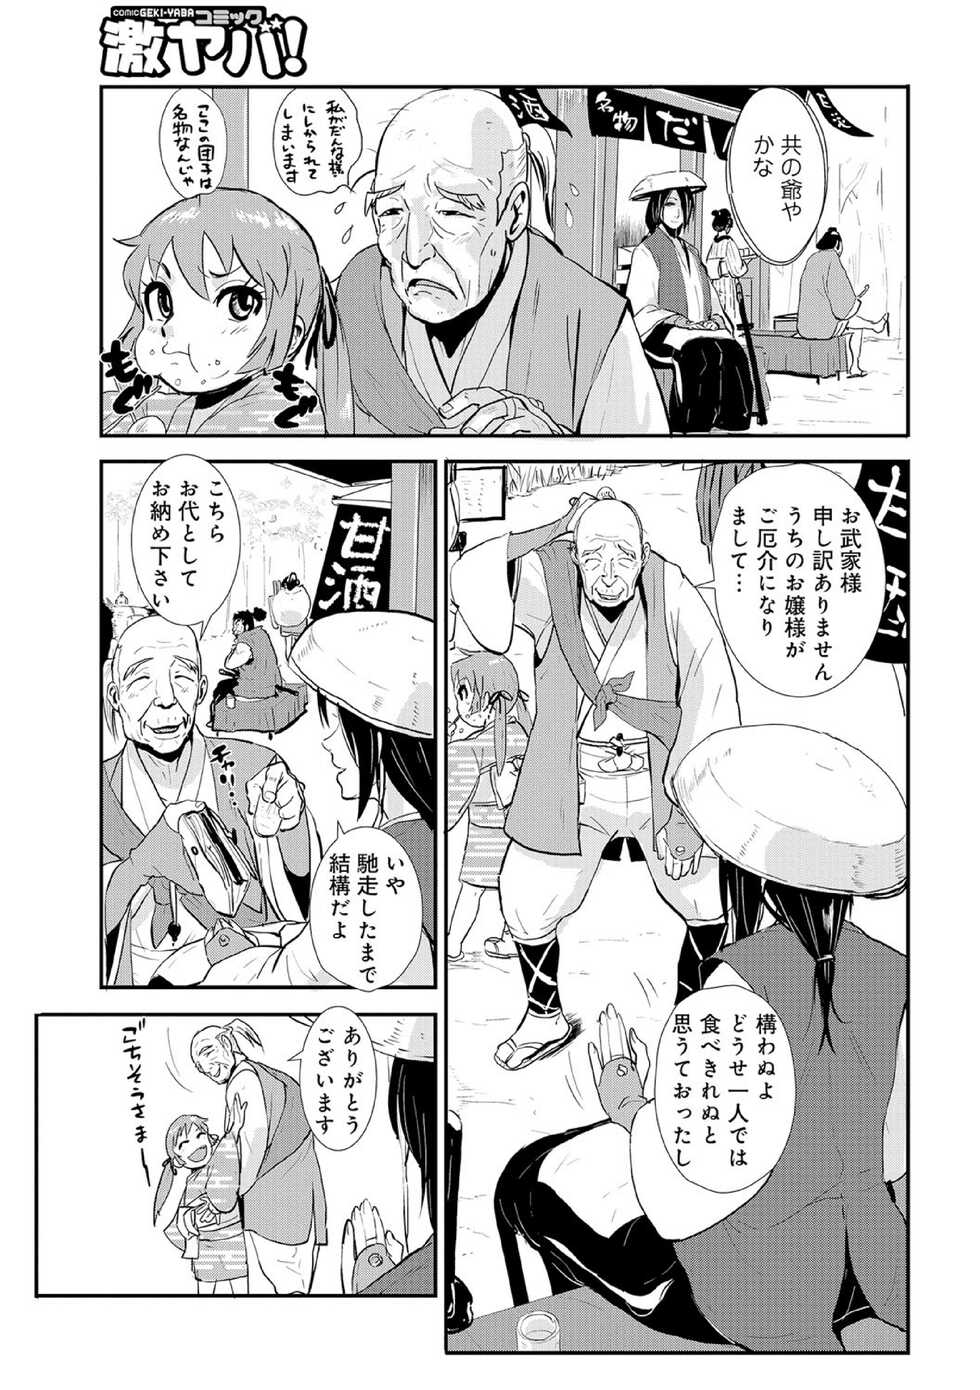 Impregnated Samurai 01: Maguwai Journey on a Woman's Road - Page 5